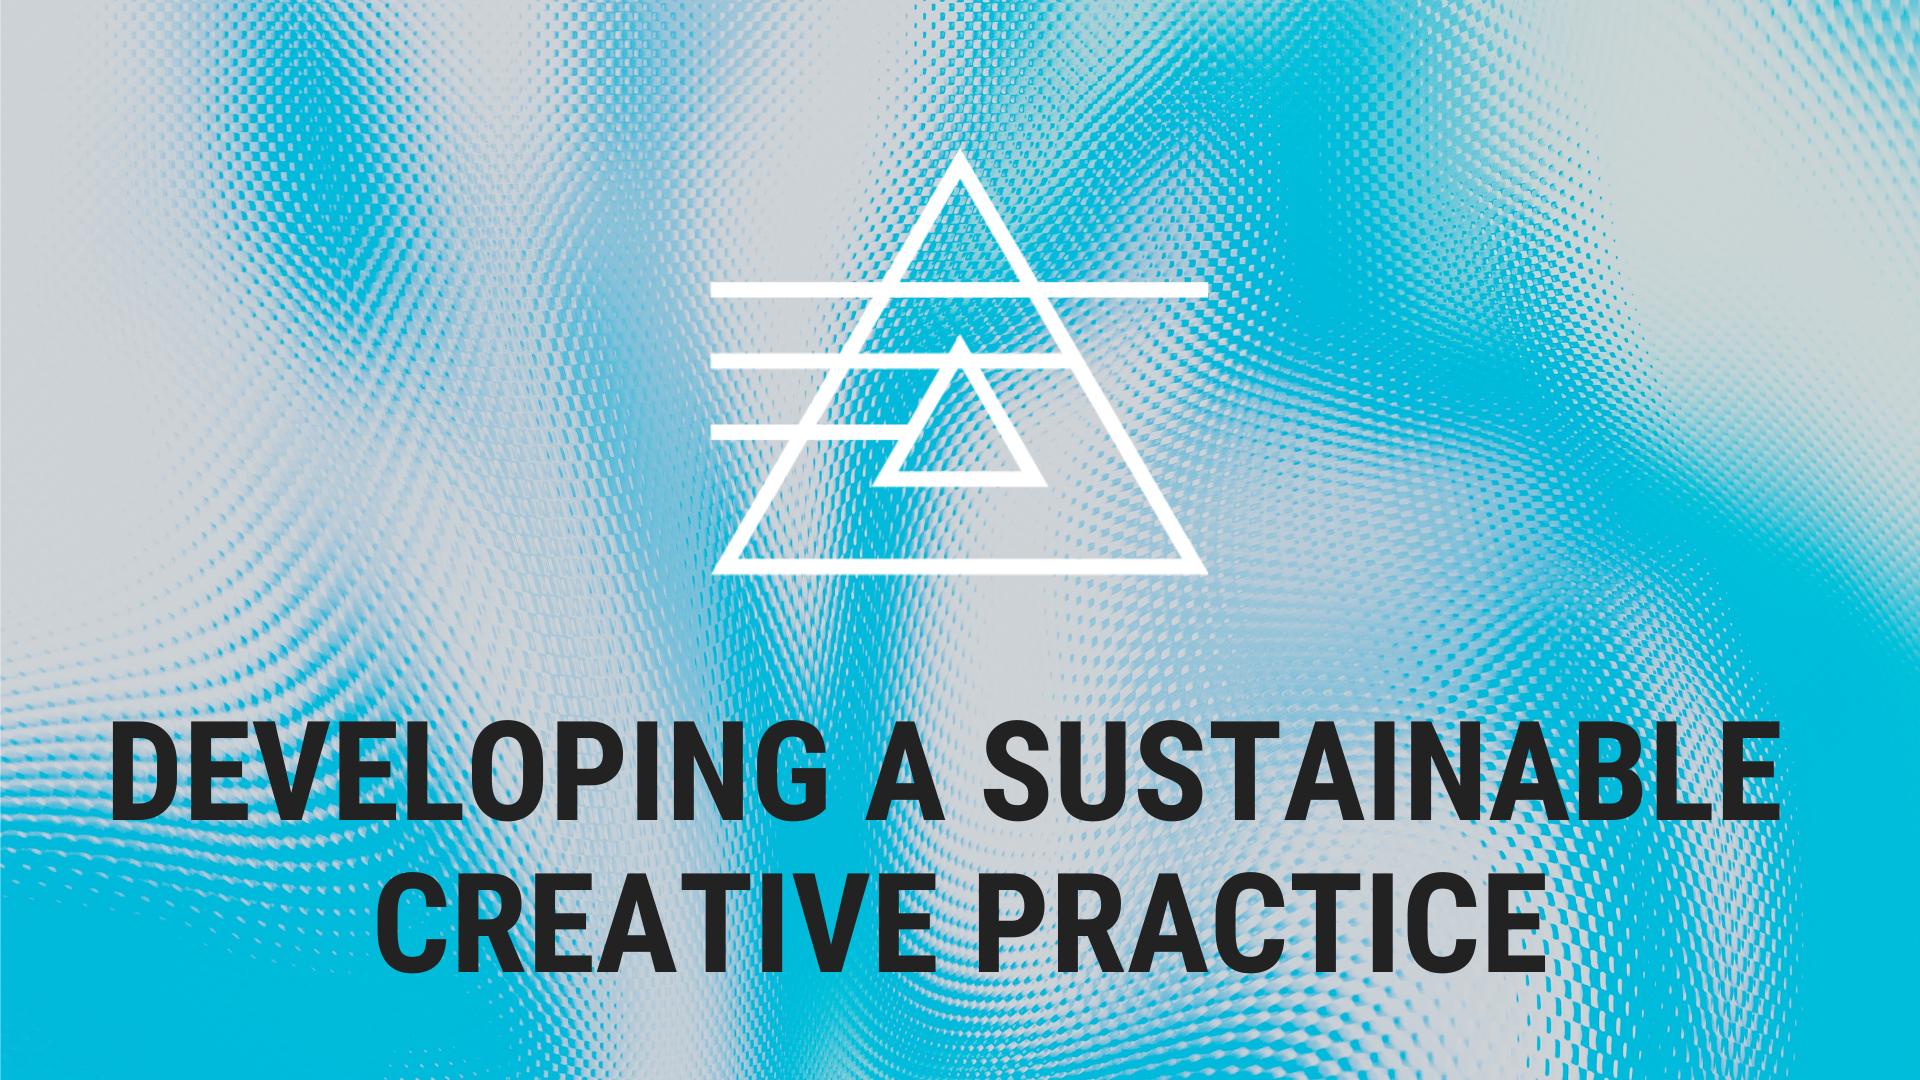 Developing a sustainable creative practice